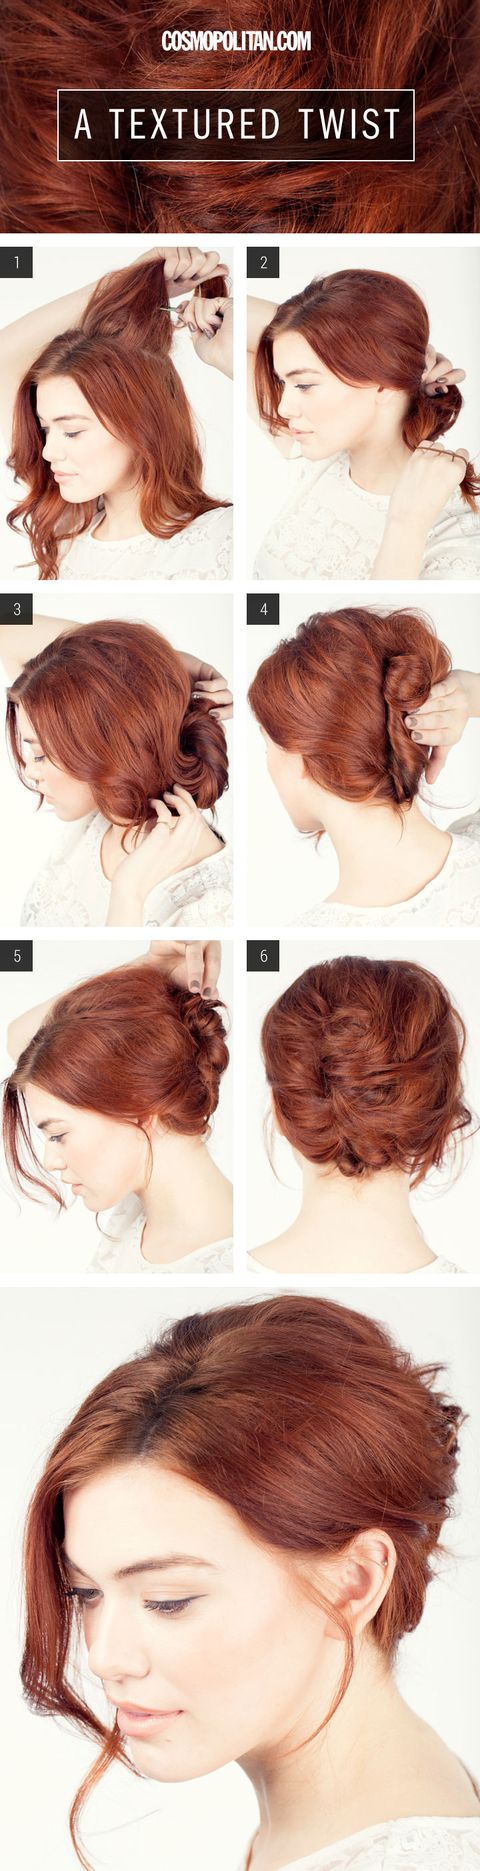 Lazy Girl Hairstyles Easy Hairstyles To Do At Home